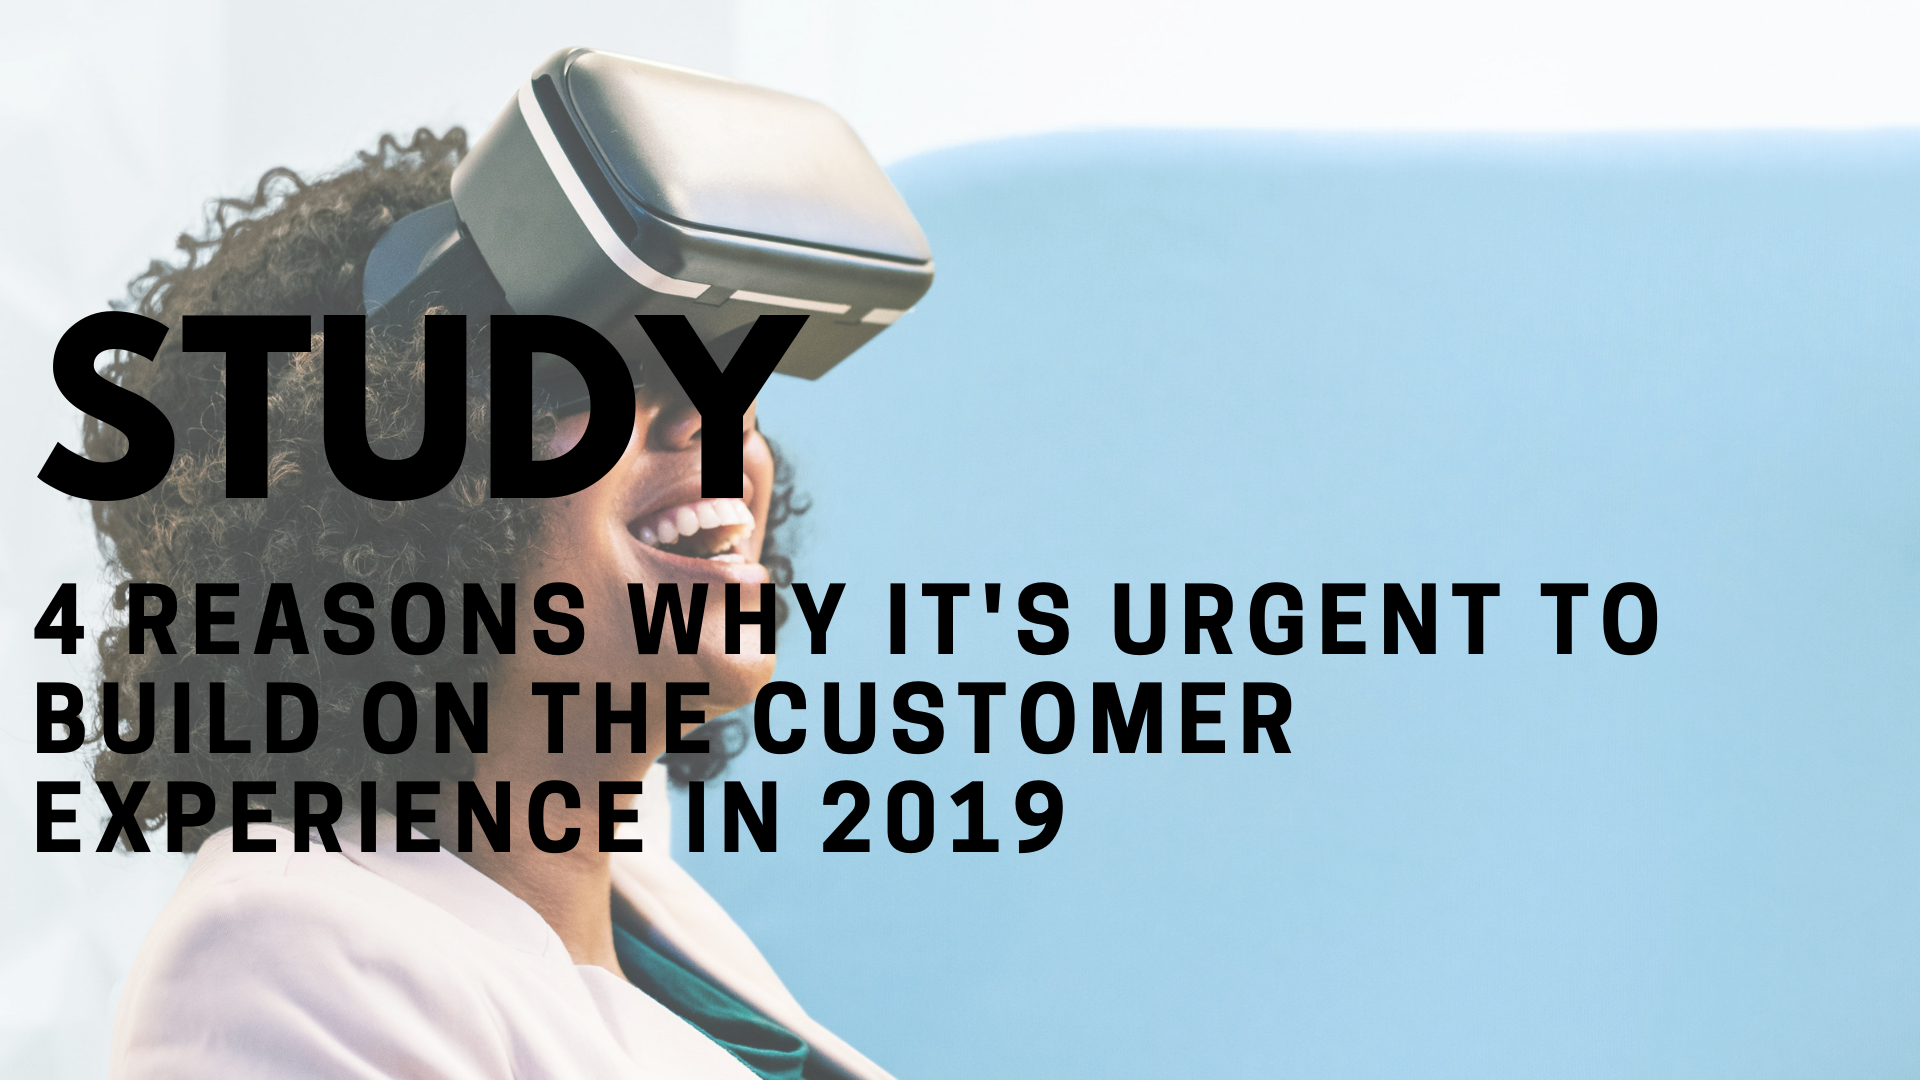 4 reasons why it is urgent to build on the customer experience in 2019